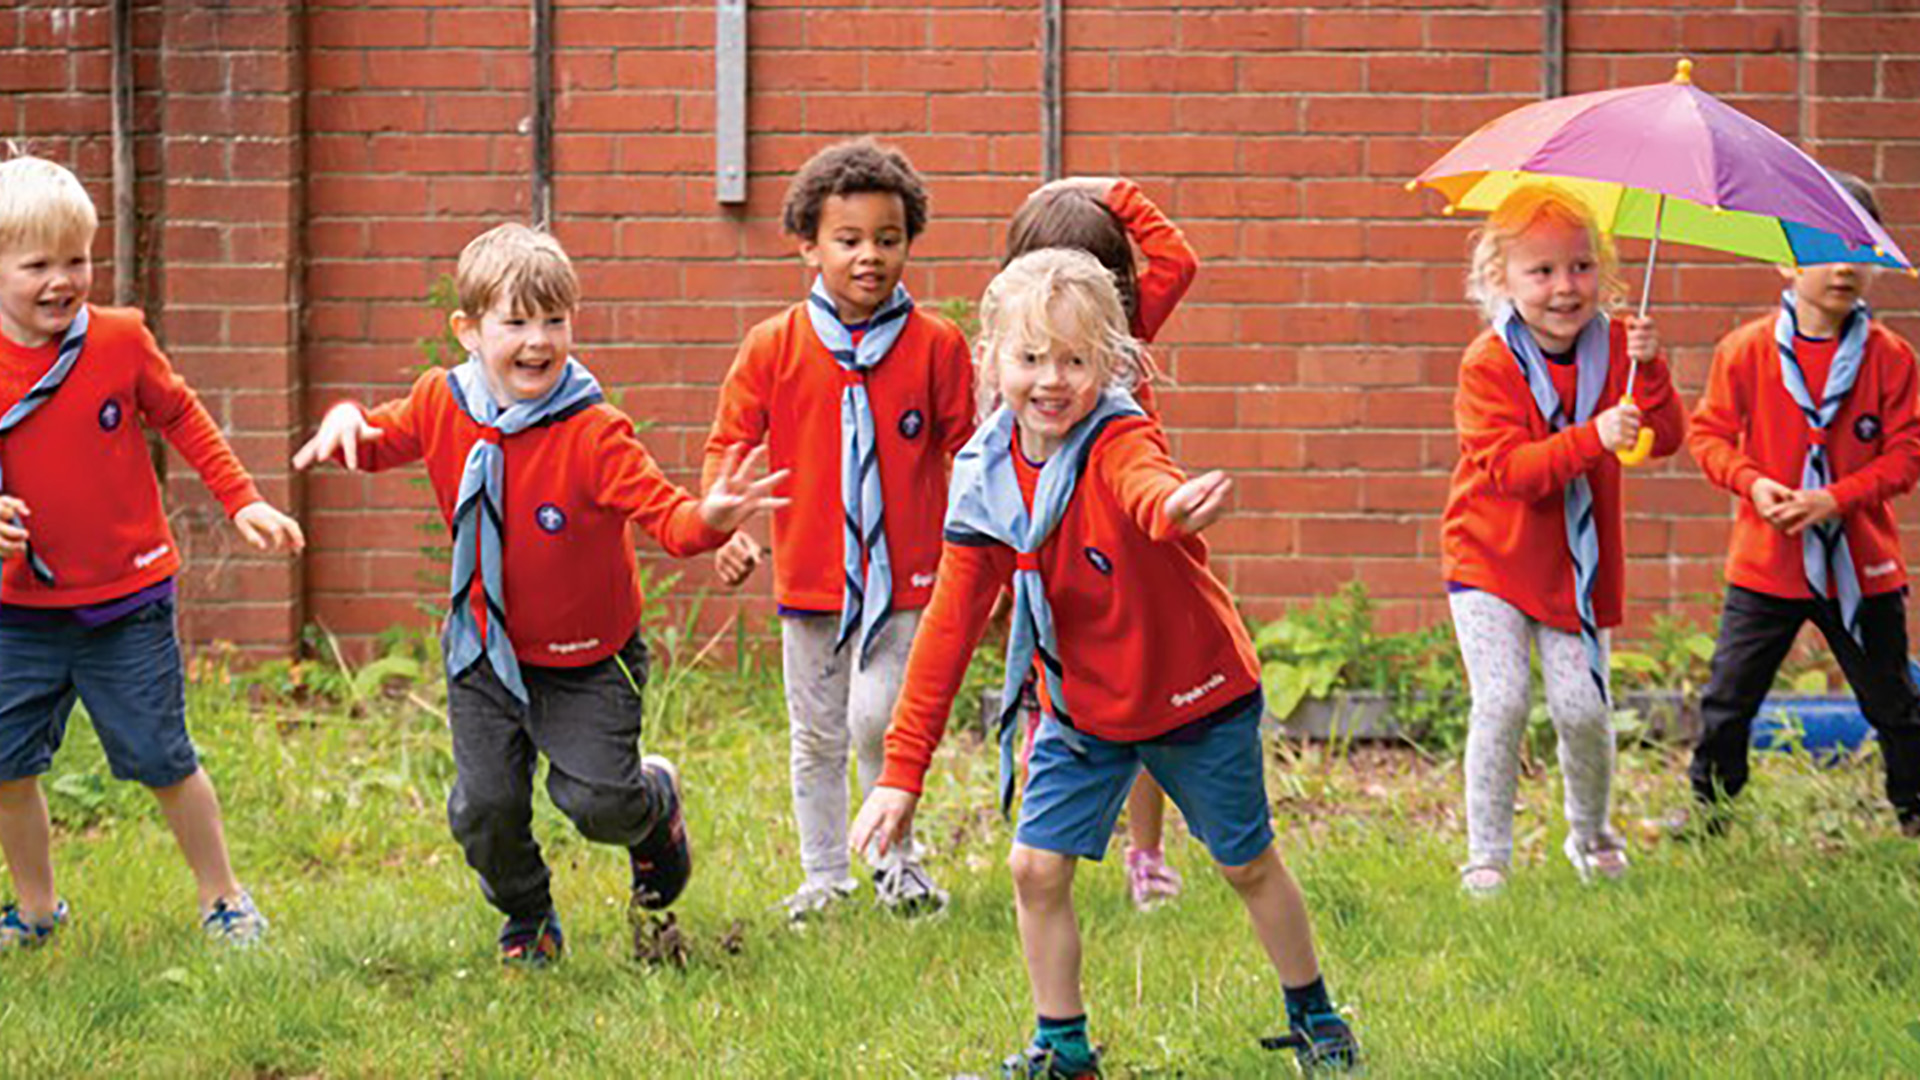 Young children in Squirrel uniforms playing a wide game with an umbrella